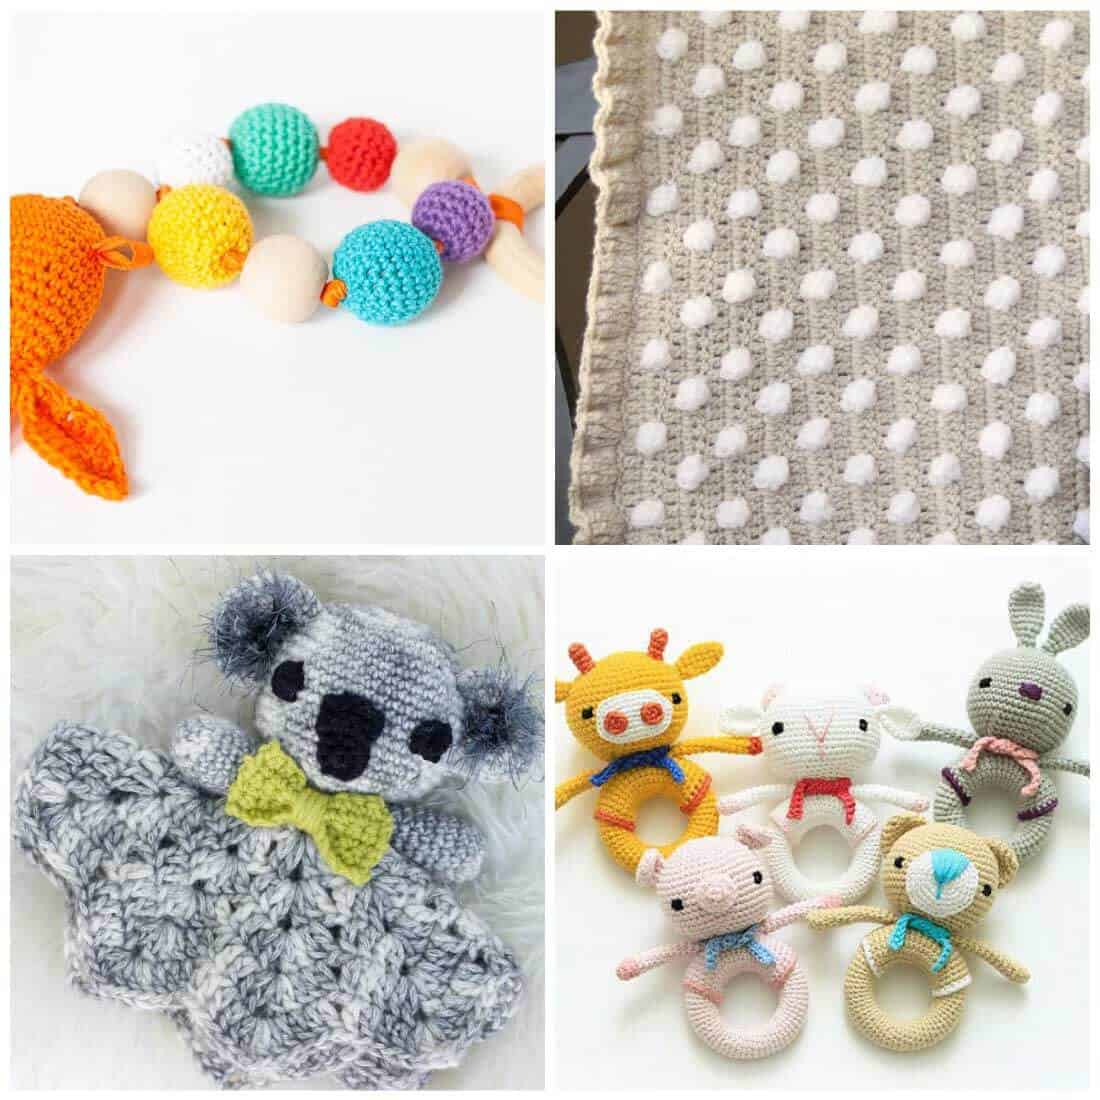 free crochet patterns | baby crochet patterns | crochet patterns for baby | Use one of these adorable crochet patterns to make something for that upcoming baby shower. These free patterns make adorable gifts that will be treasured for a lifetime. 